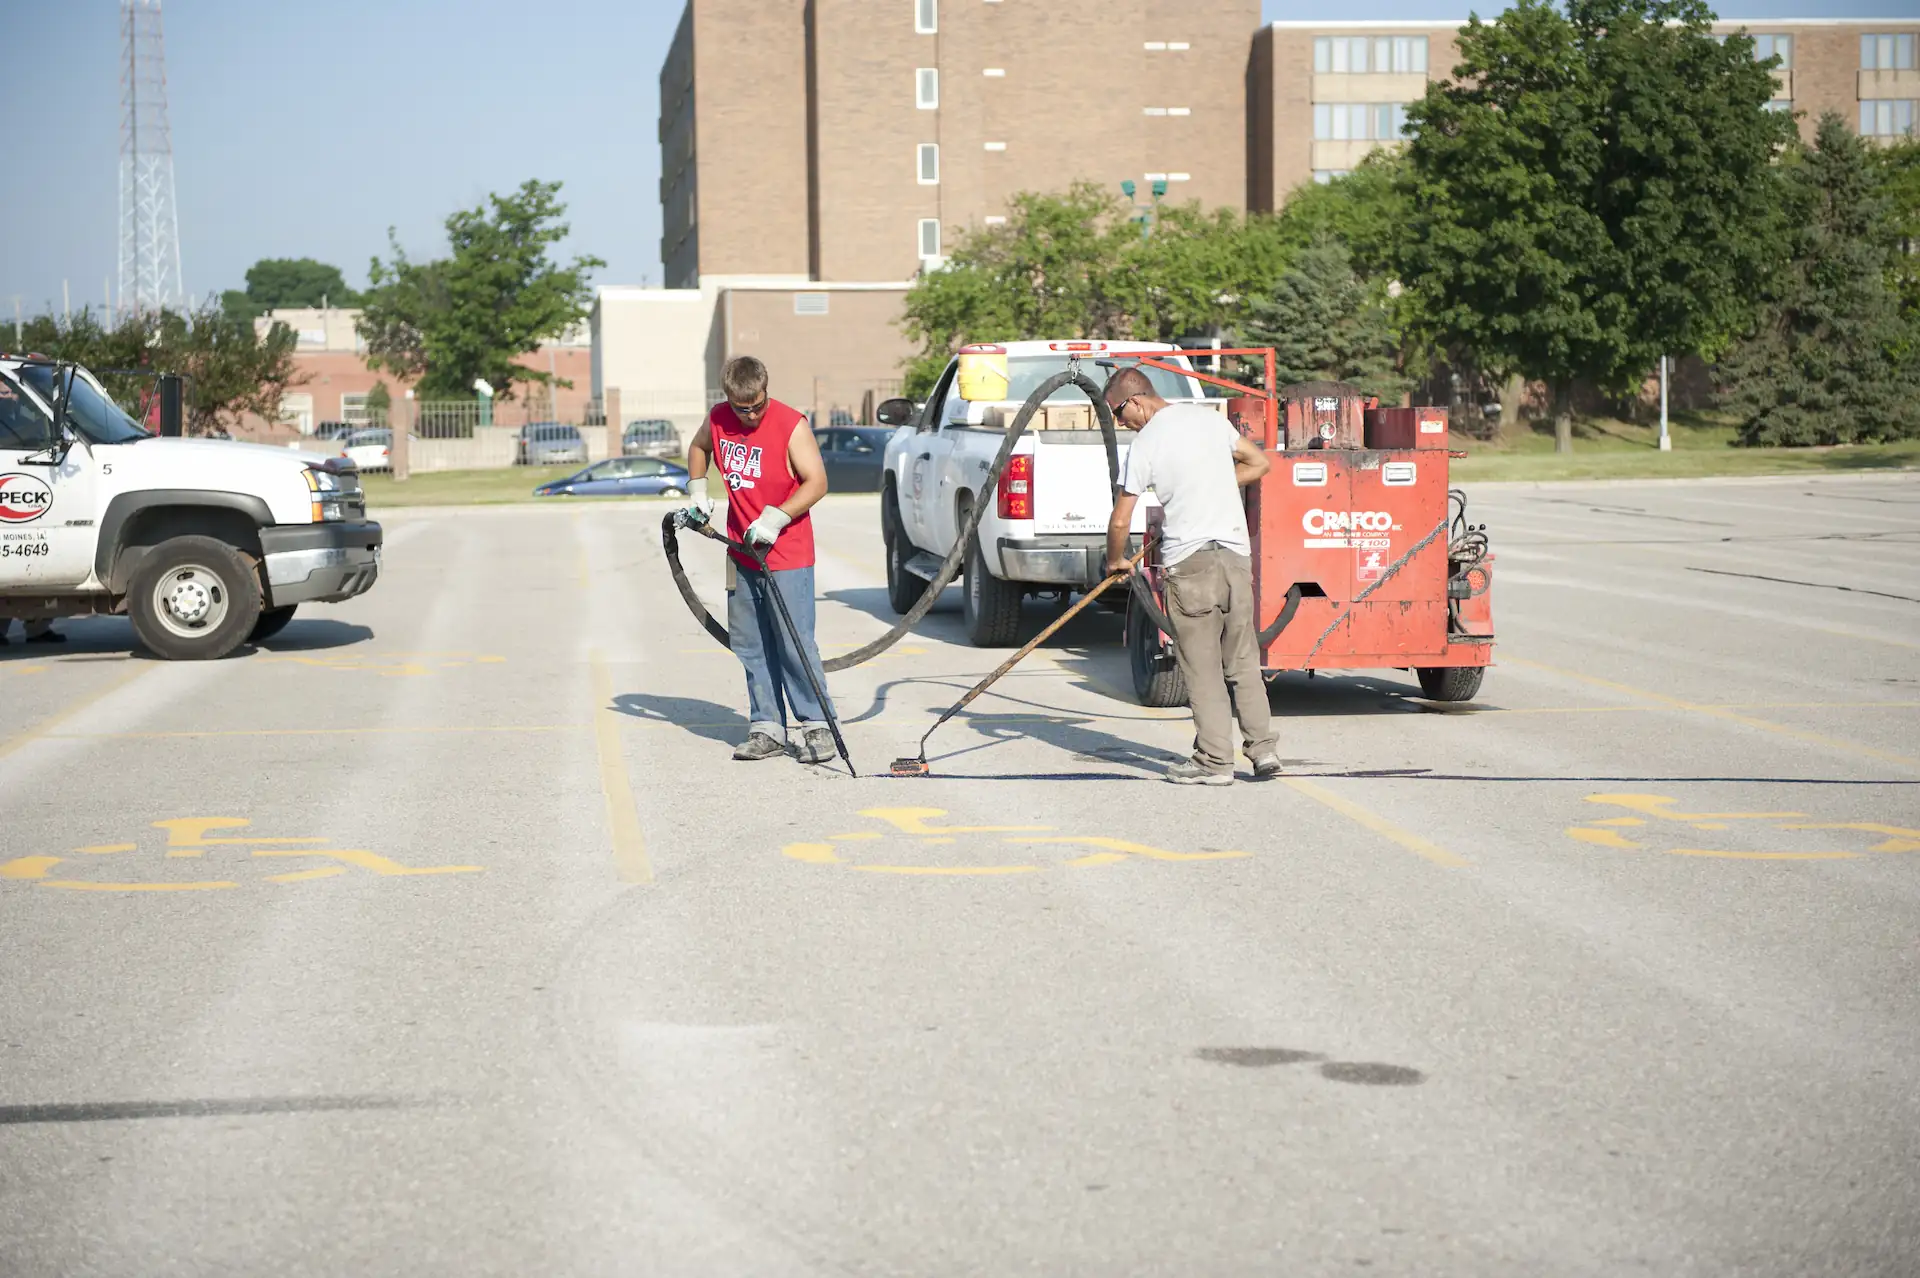 A parking lot service crew from Speck USA stripes a Des Moines parking lot.